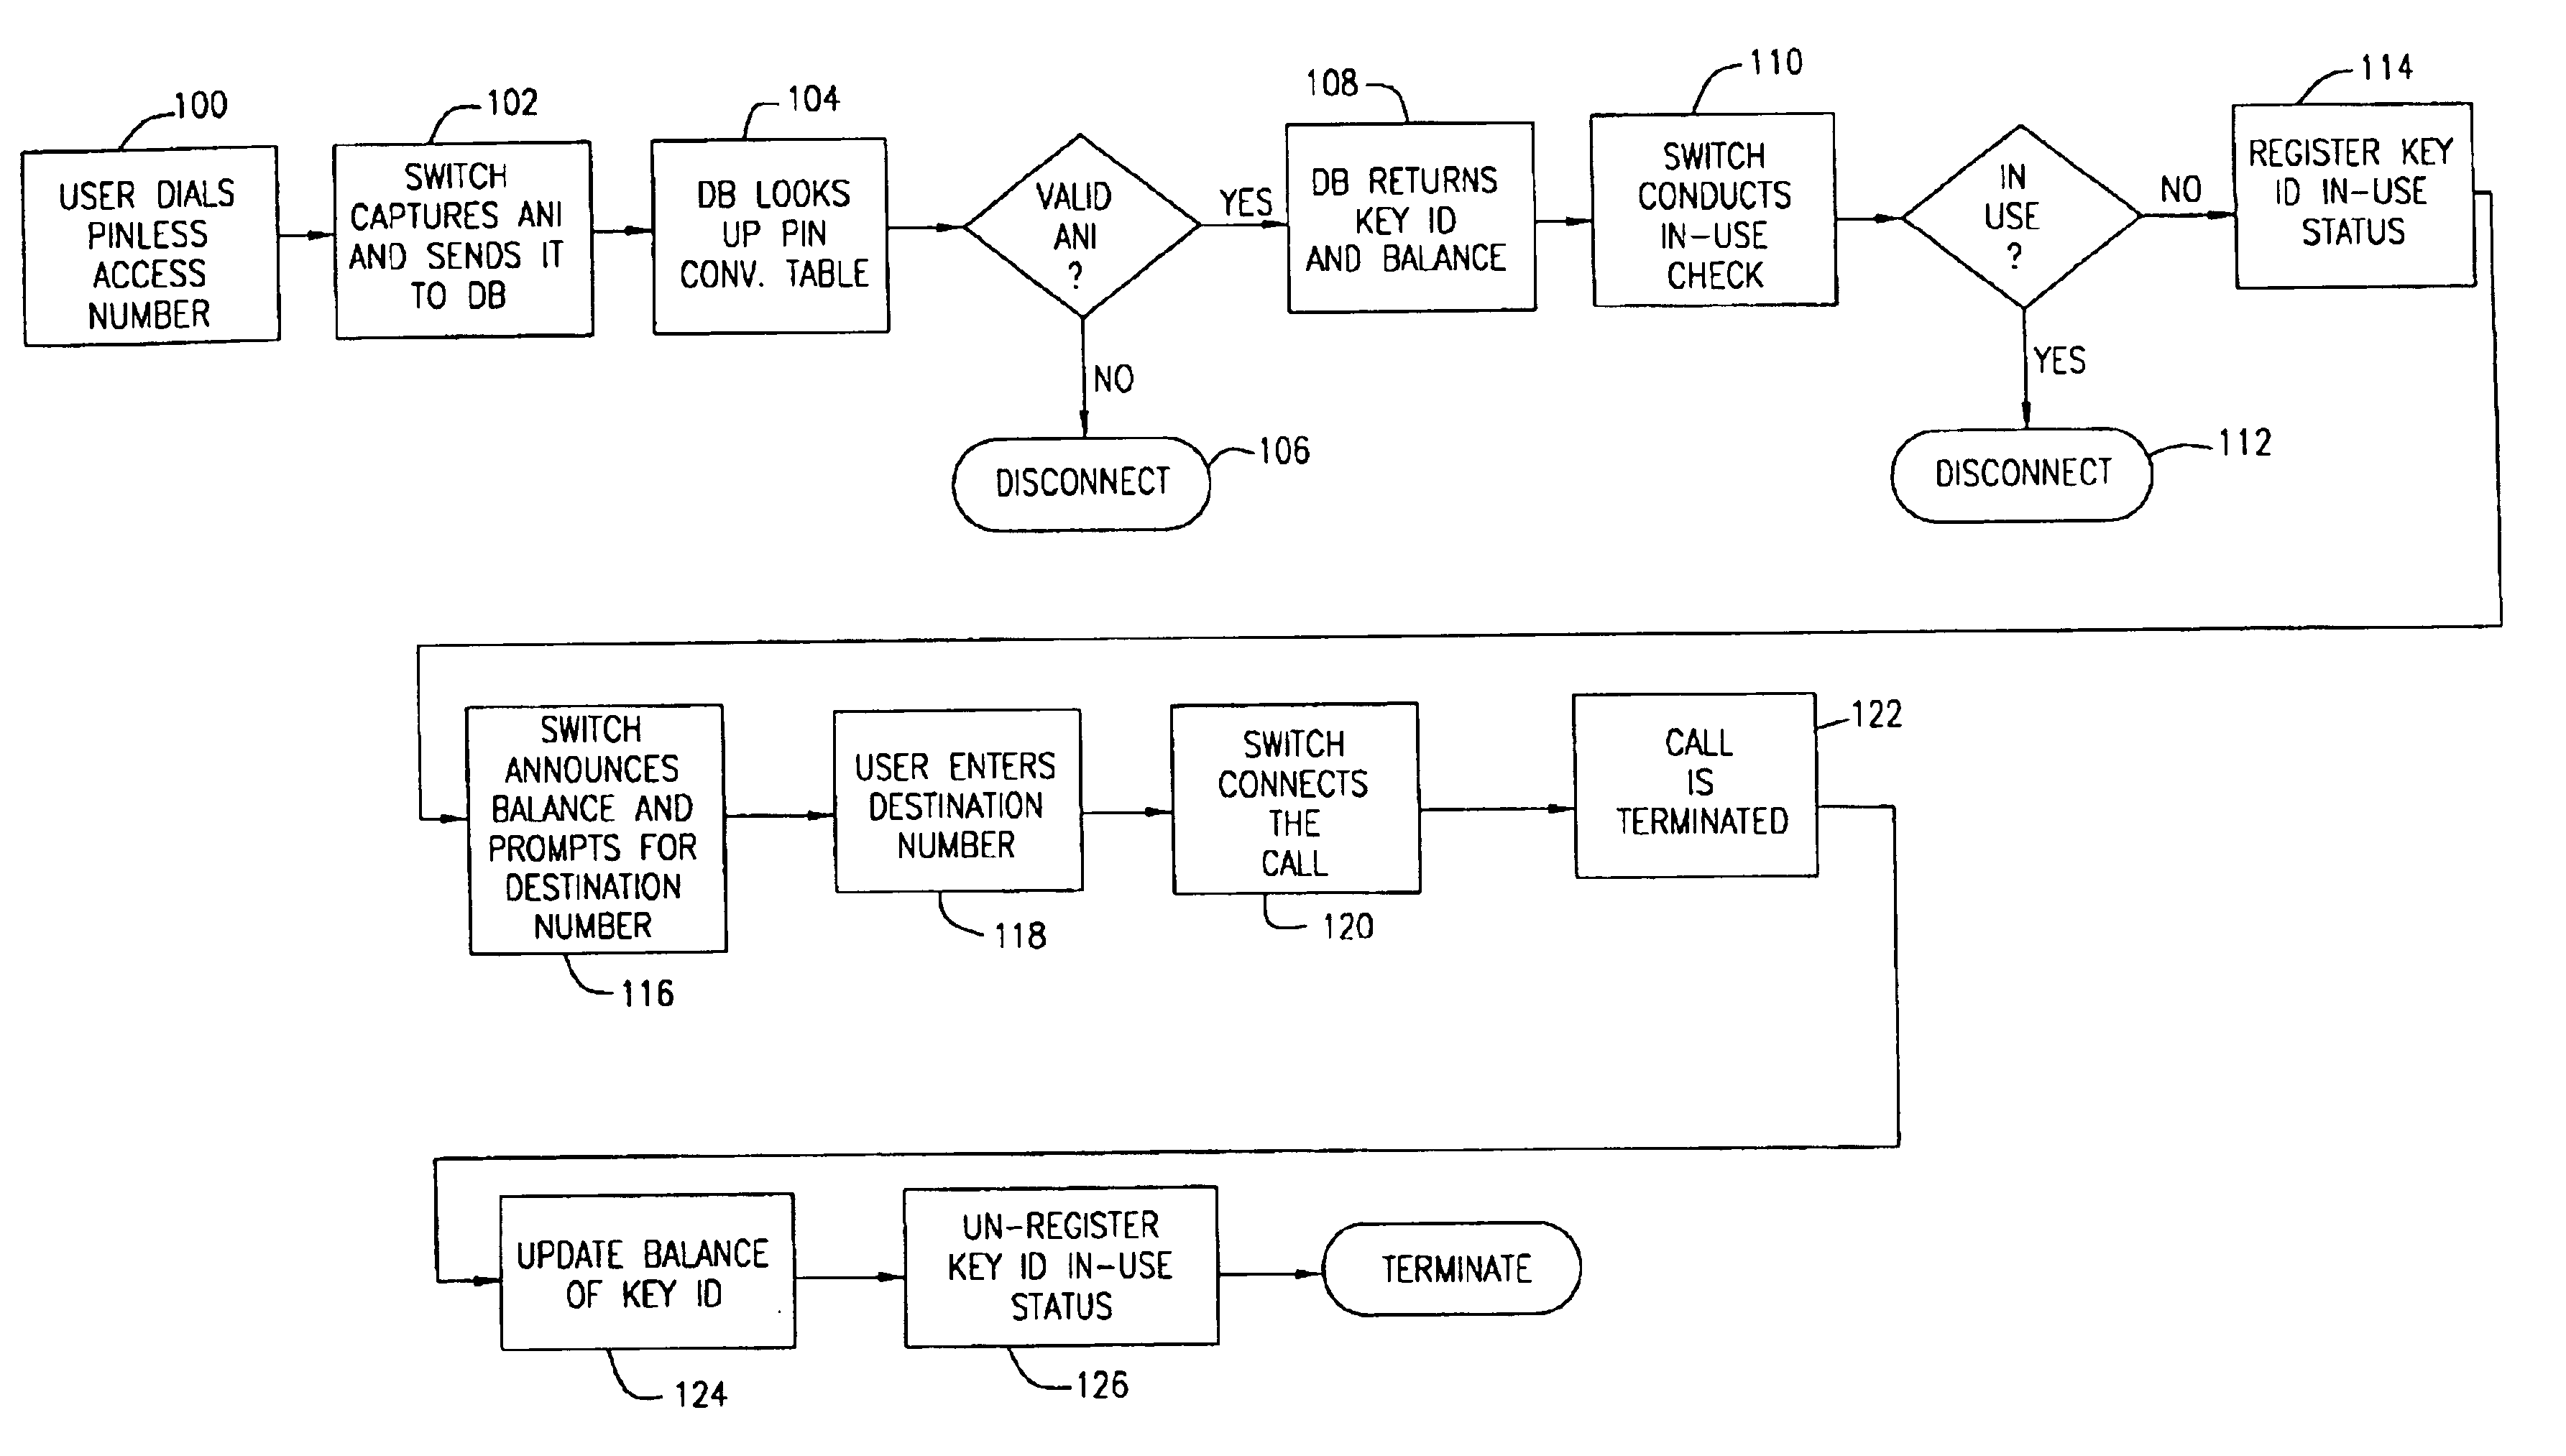 System and method for providing prepaid telecommunication services